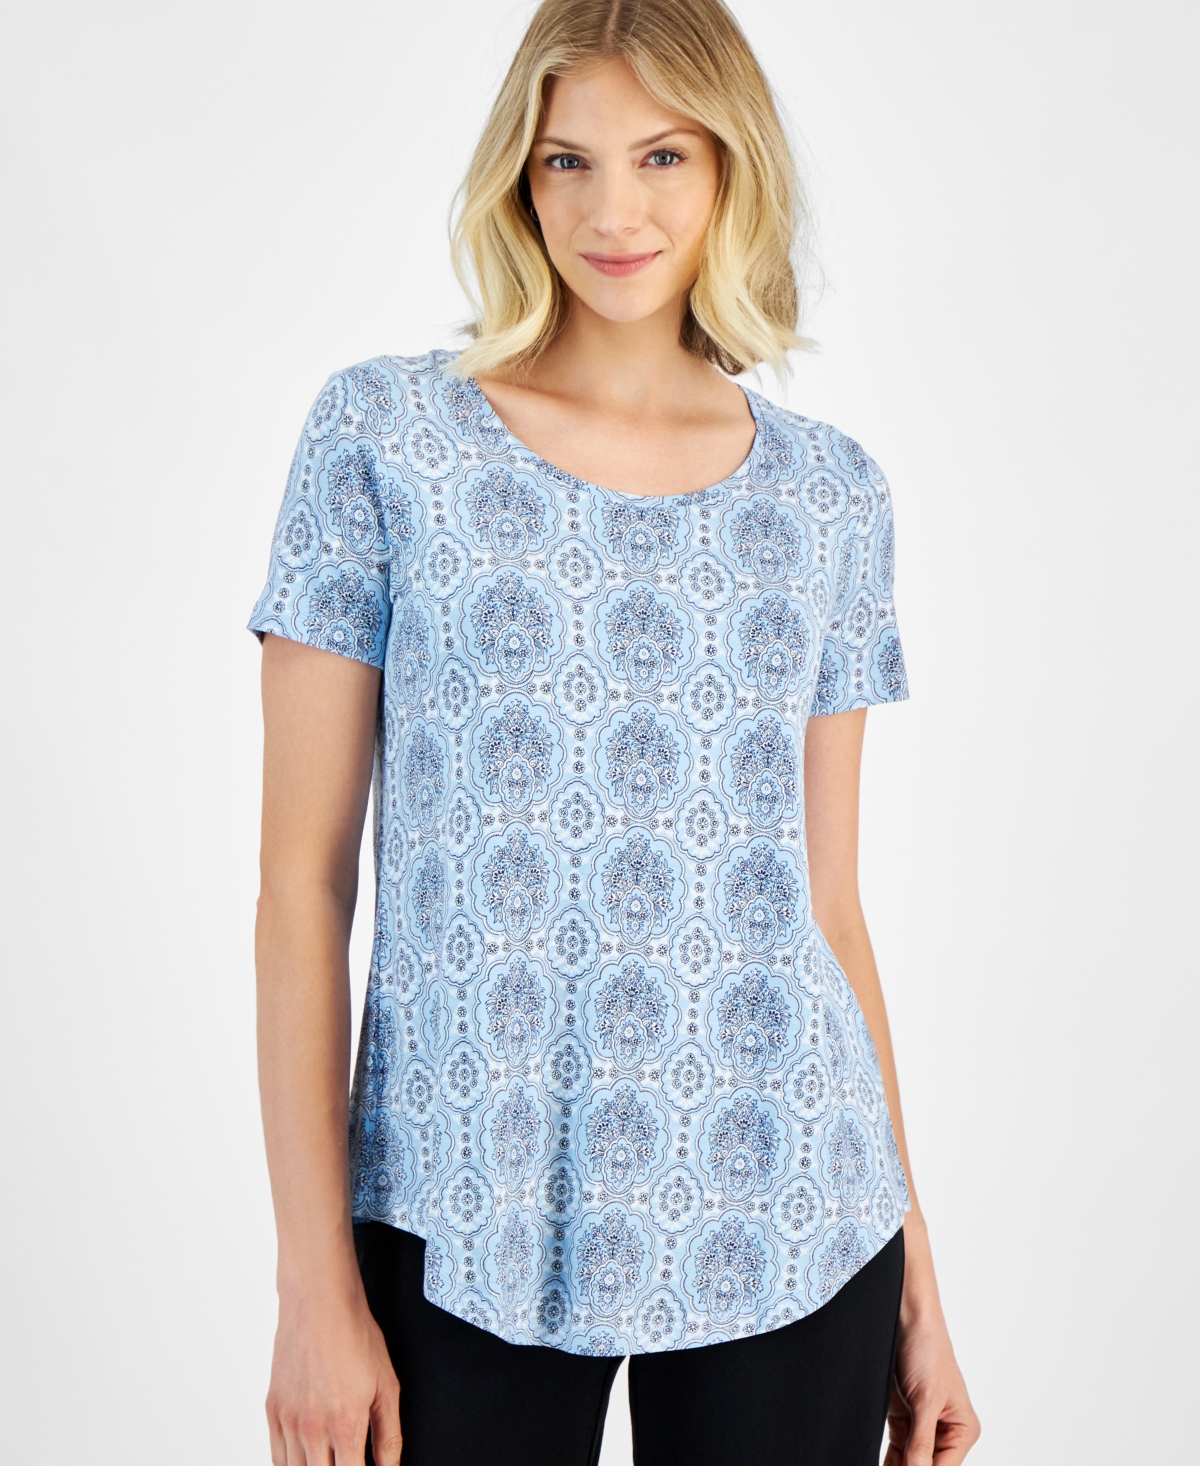 Women's Printed Scoop-Neck Short-Sleeve Top, Created for Macy's - Icicle Blue